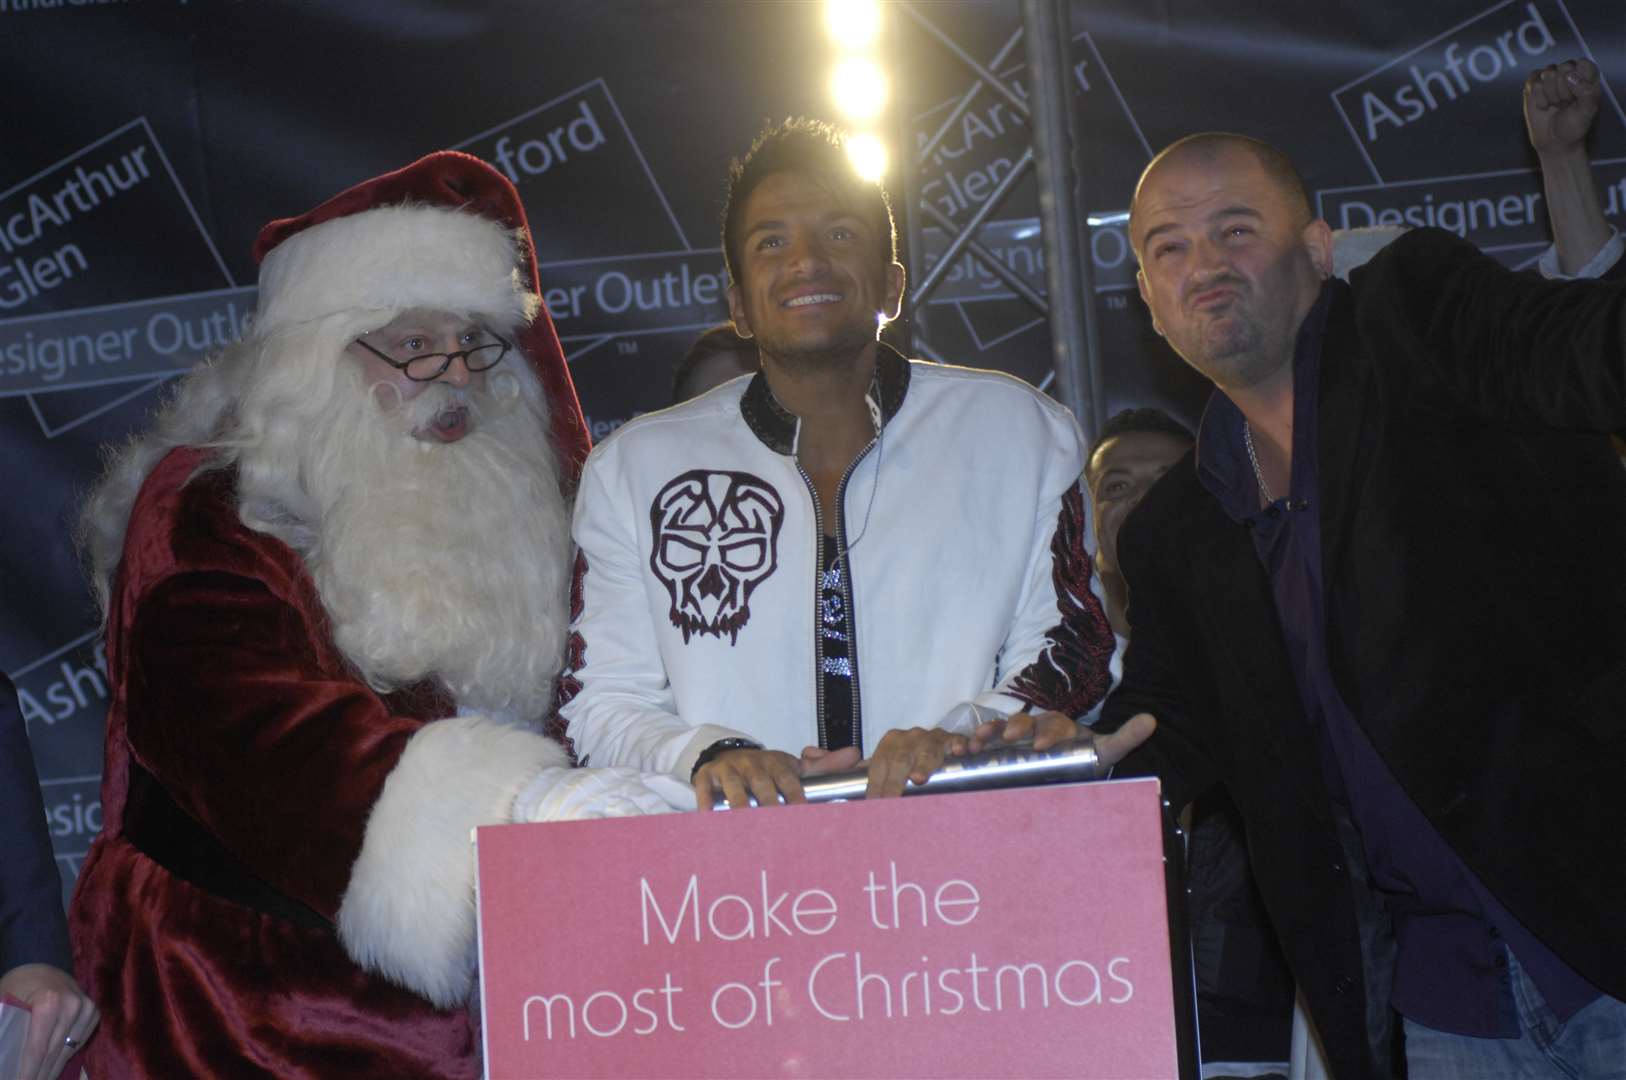 Peter Andre turned on the Designer Outlet's Christmas lights in 2011